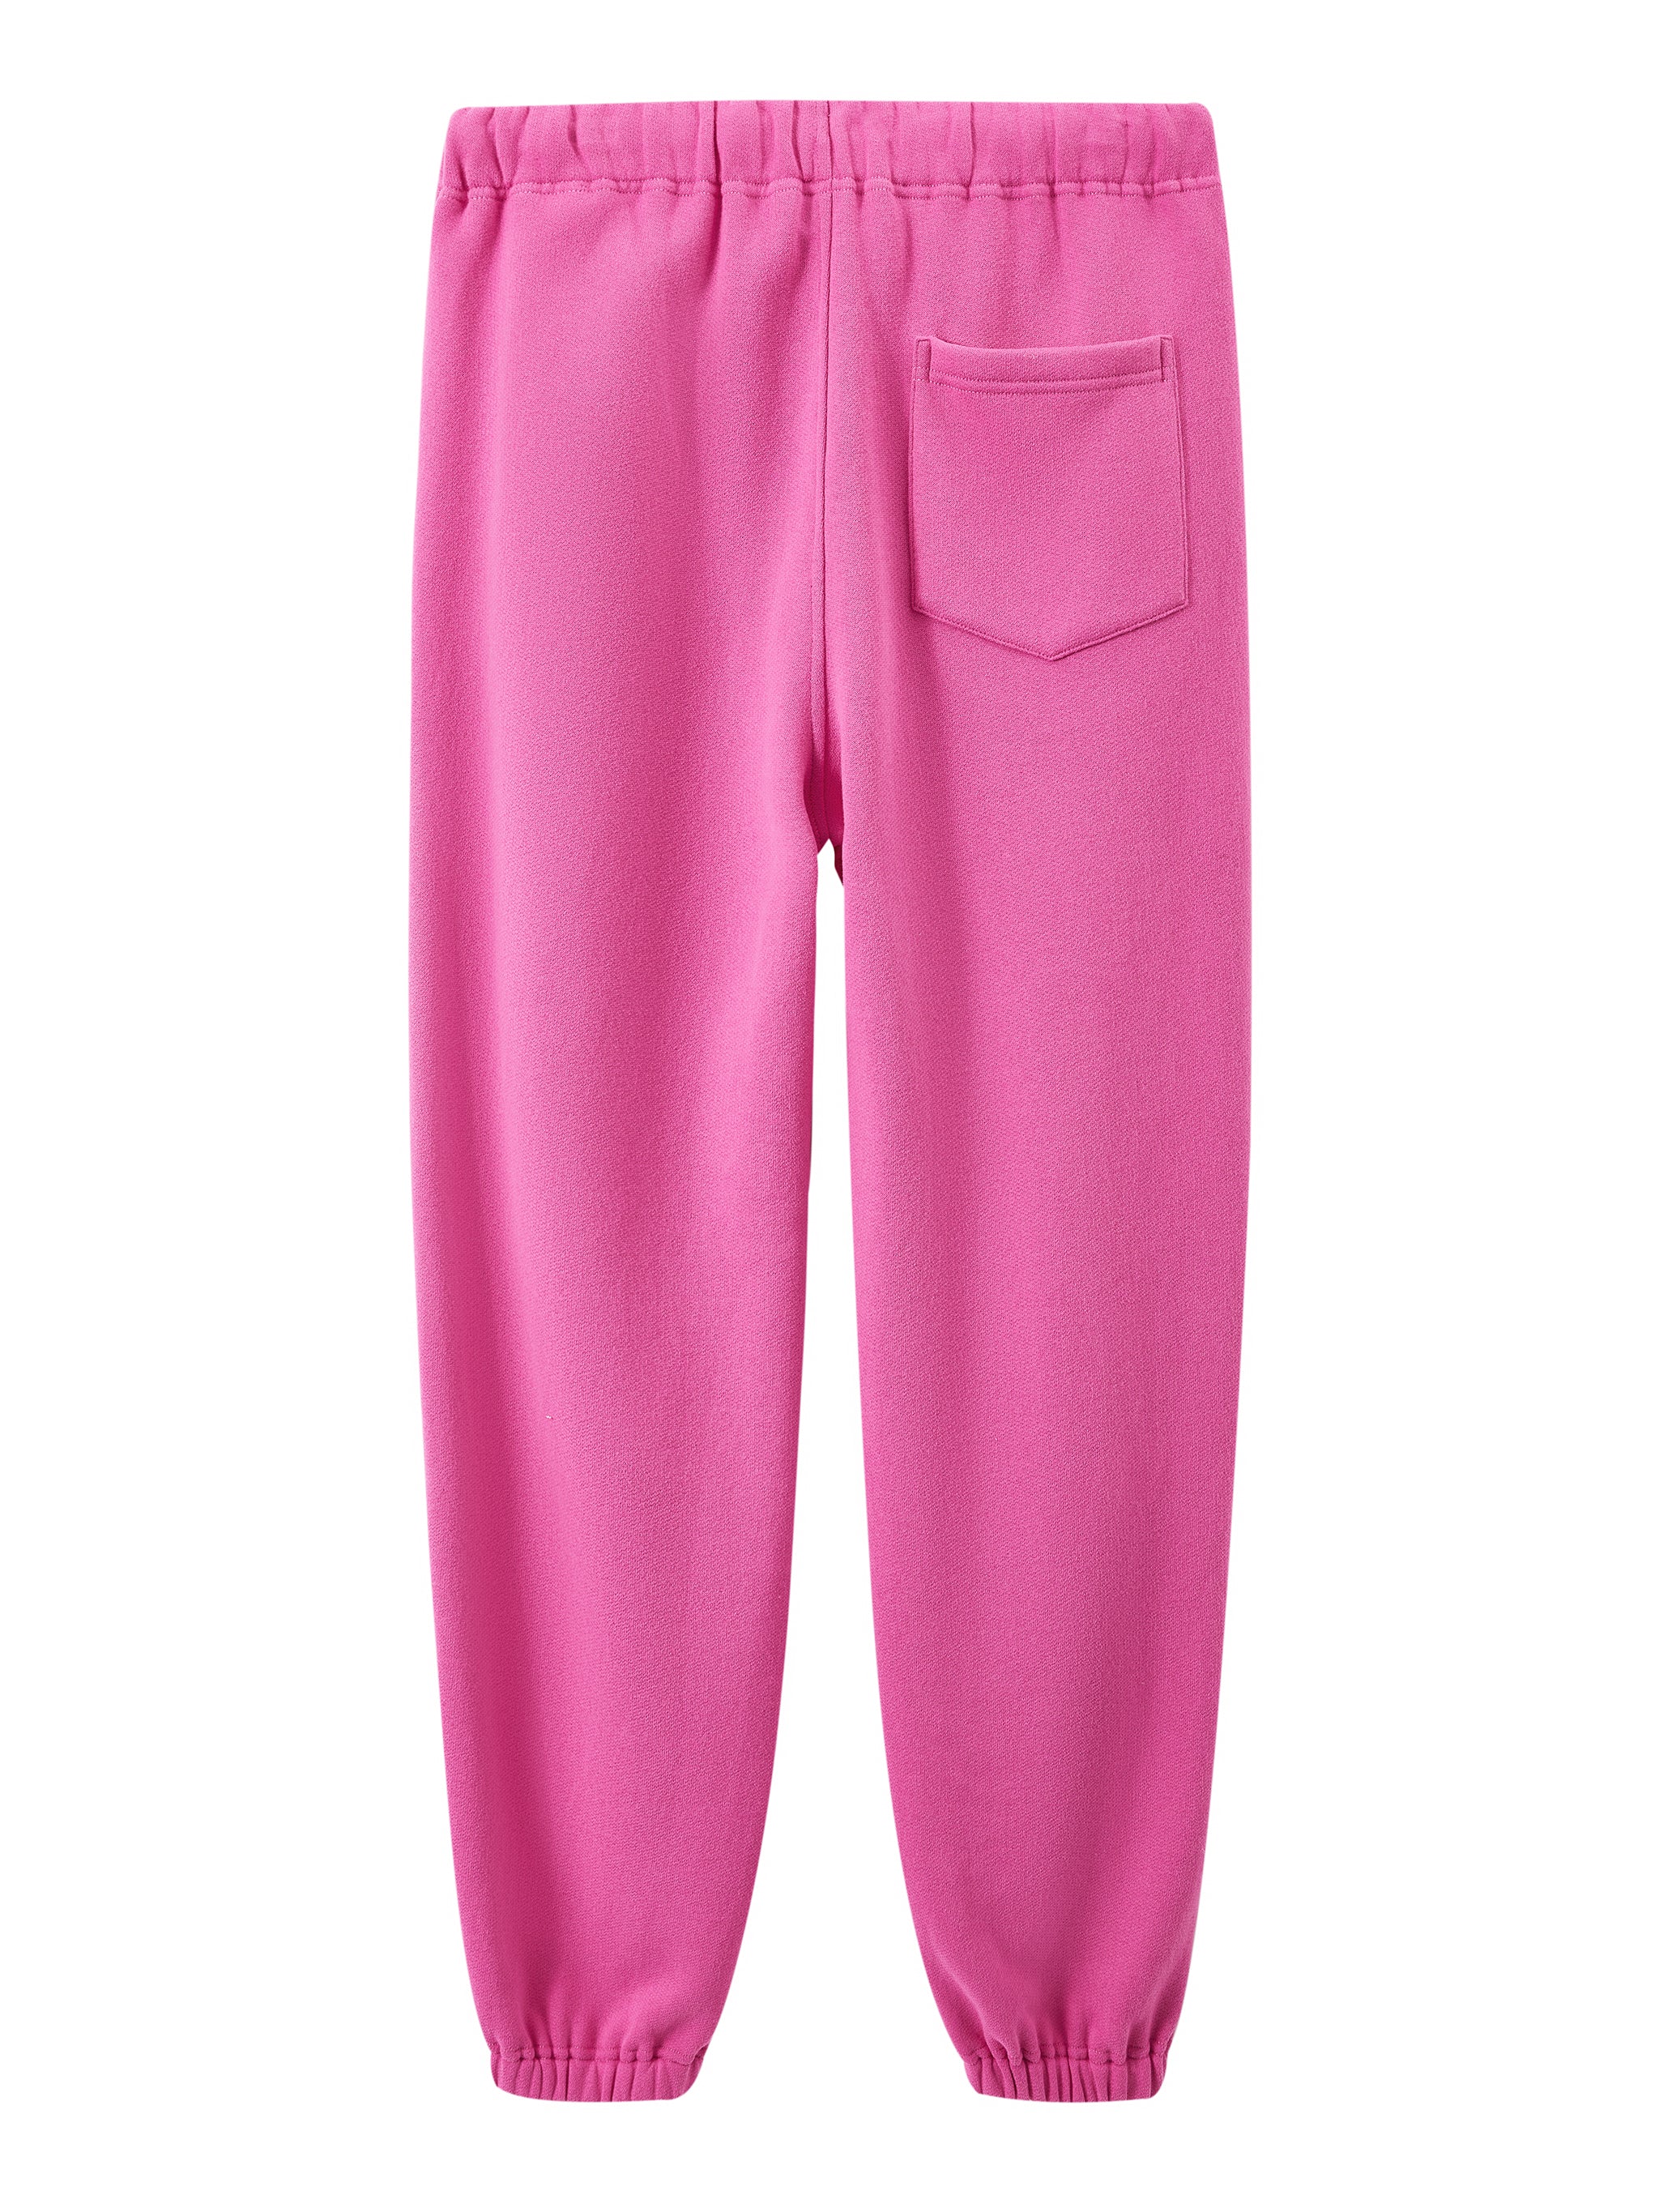 Roots Equestrian Sweatpants - Light Pink - Women's XL – THE STANDBY LIST